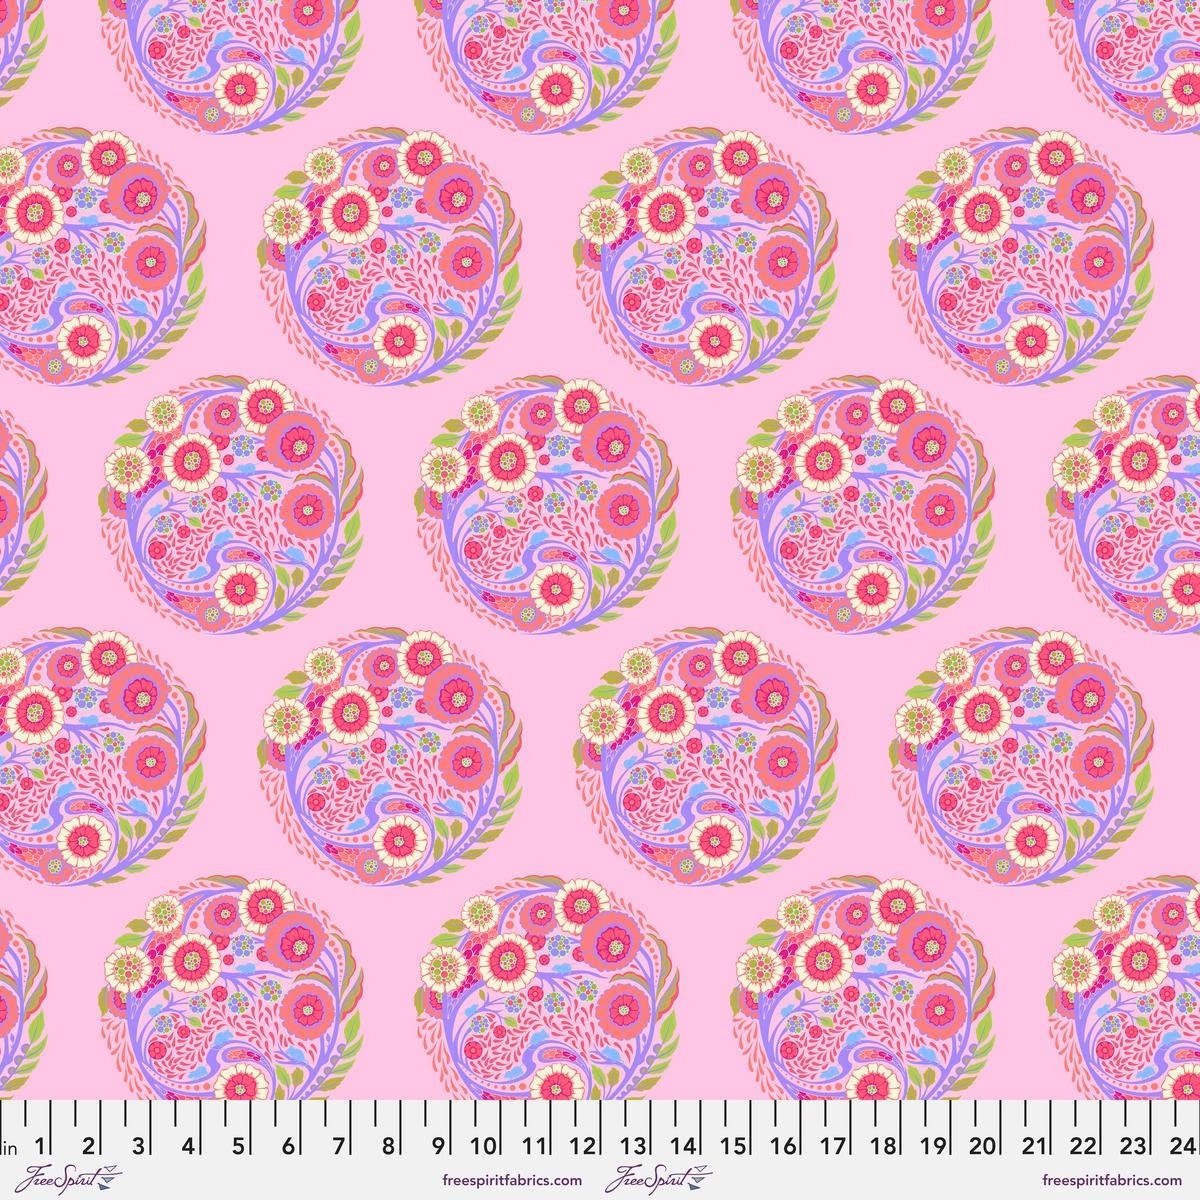 Tula Pink PARISVILLE Topiary Strawberry PWTP188, Quilt Fabric, Quilting Fabric, Cotton Fabric, Fabric By The Yard